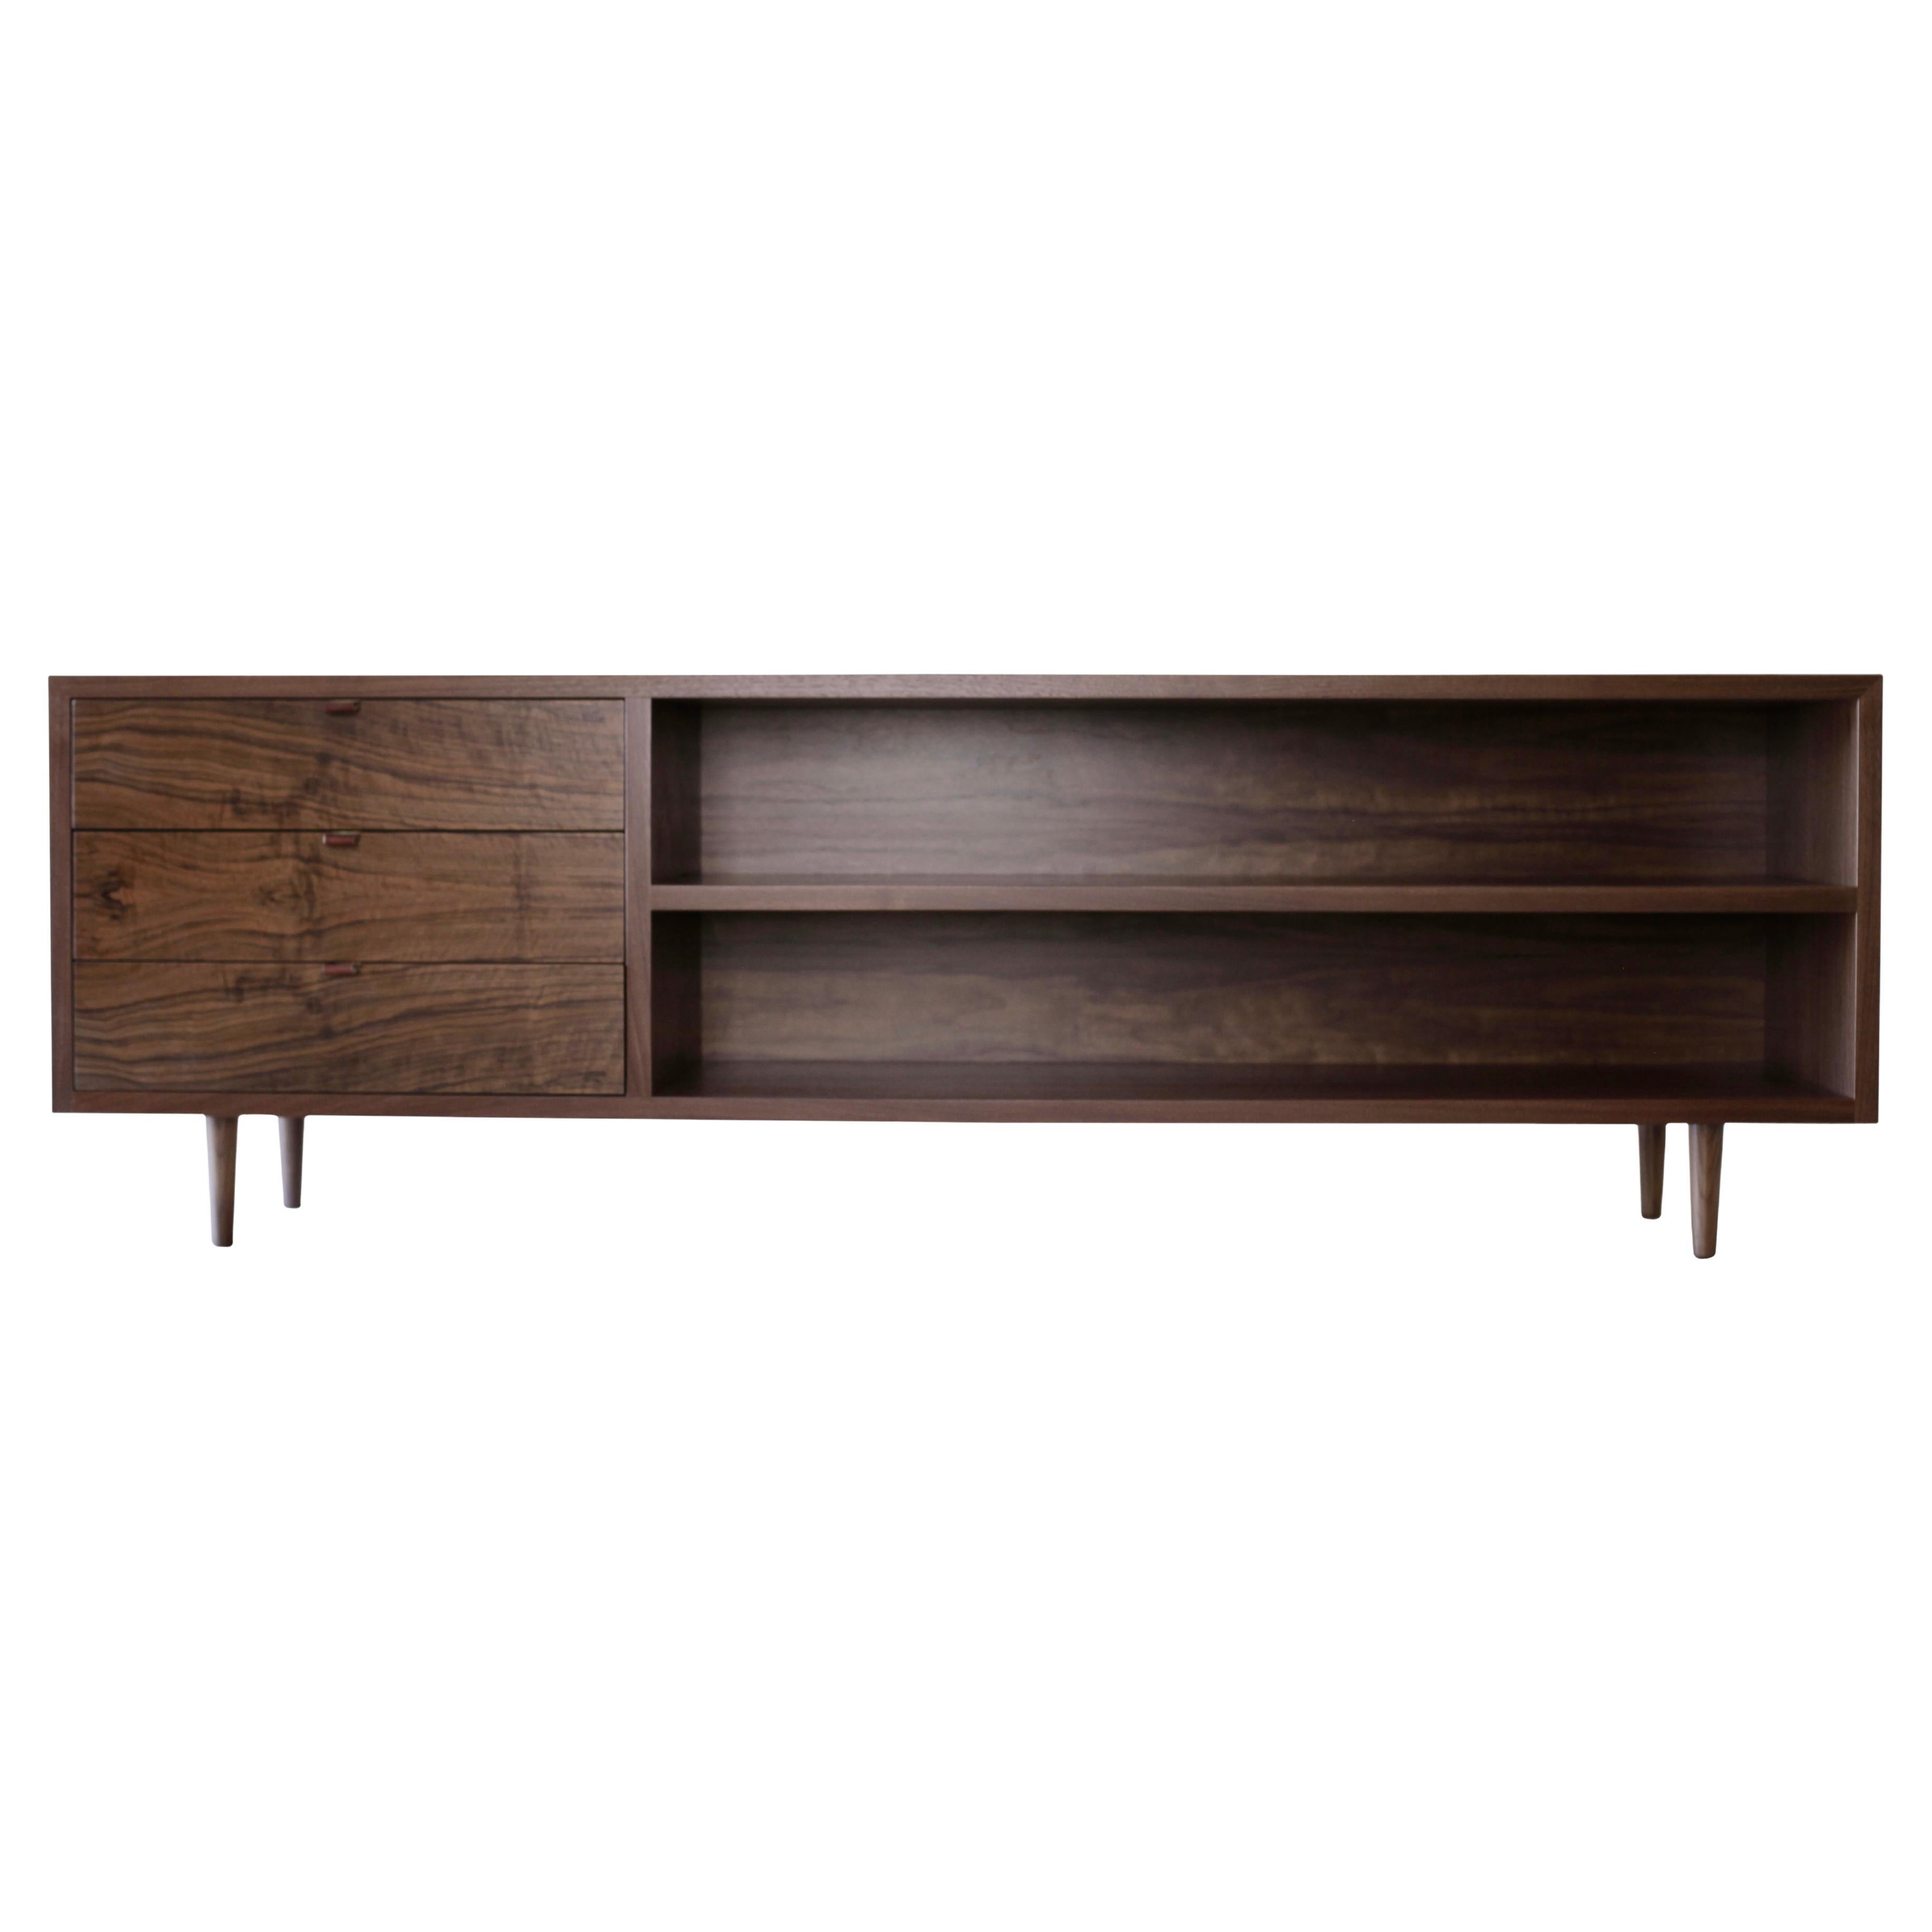 This Mid-Century inspired walnut sideboard was designed to provide extra storage in a client’s guest house here in Santa Fe. She loves midcentury design and the guest house has contemporary lines which we aimed to echo in this piece. The straight